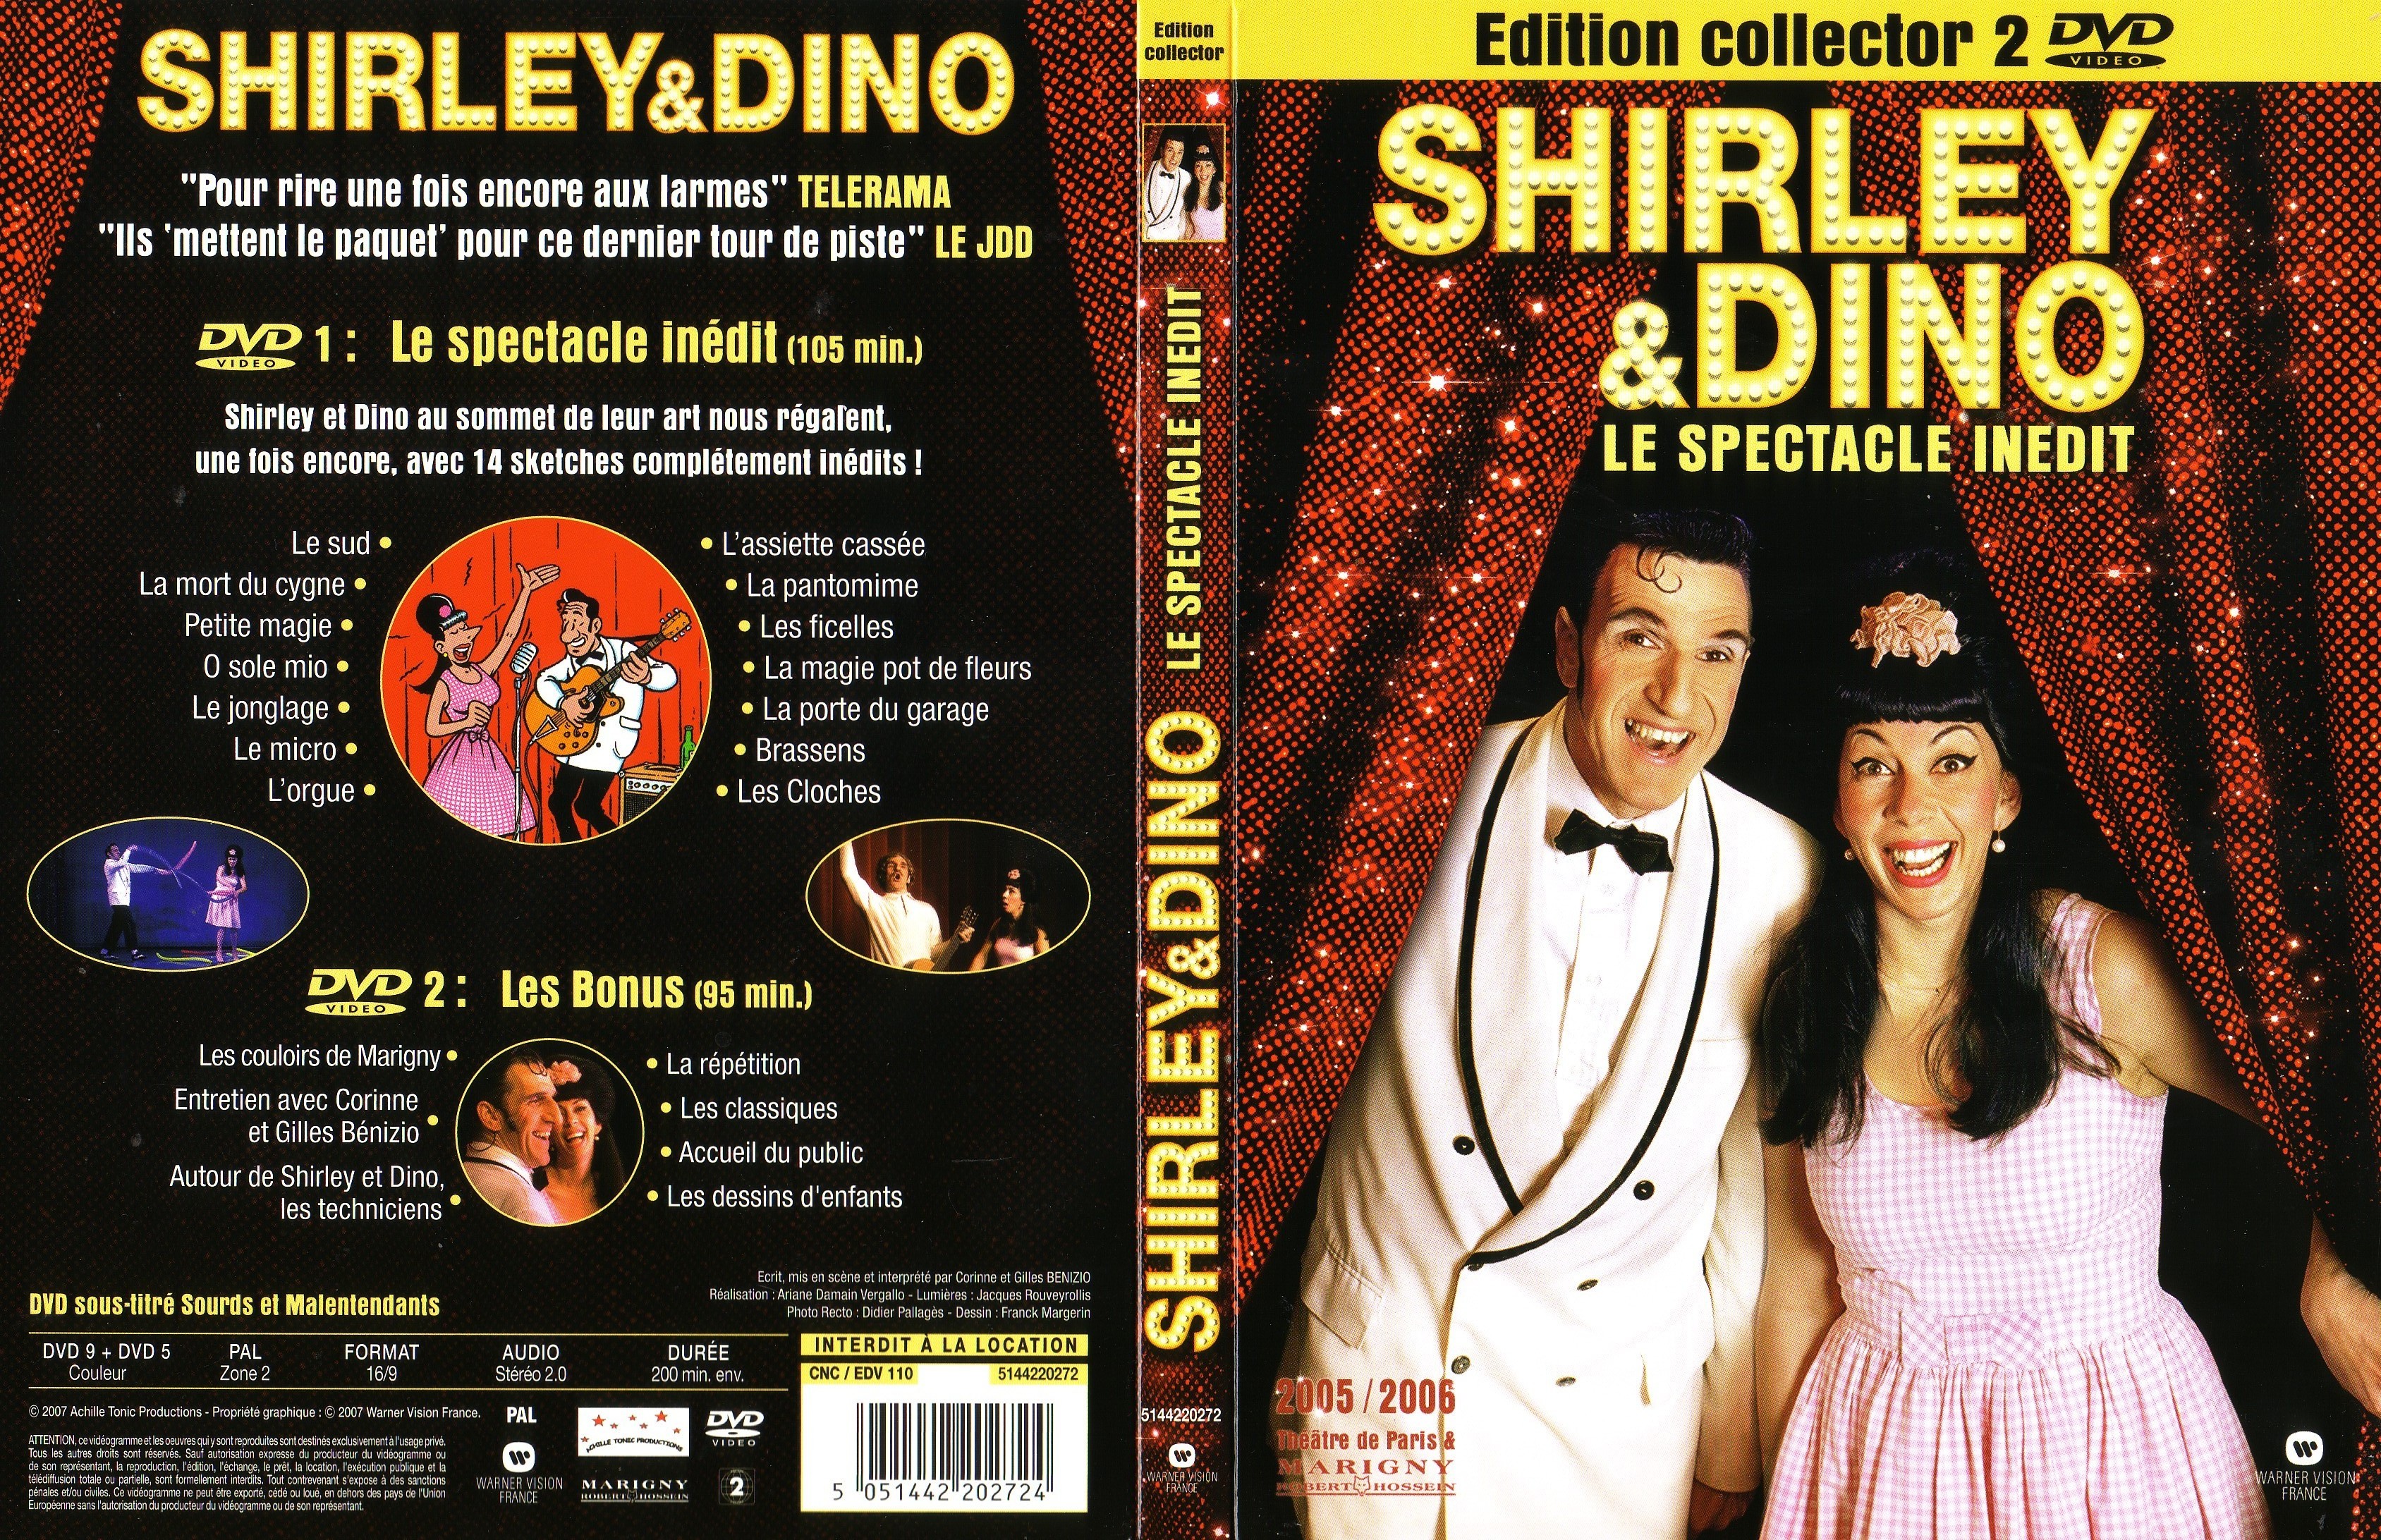 Jaquette DVD Shirley et Dino - Le spectacle indit